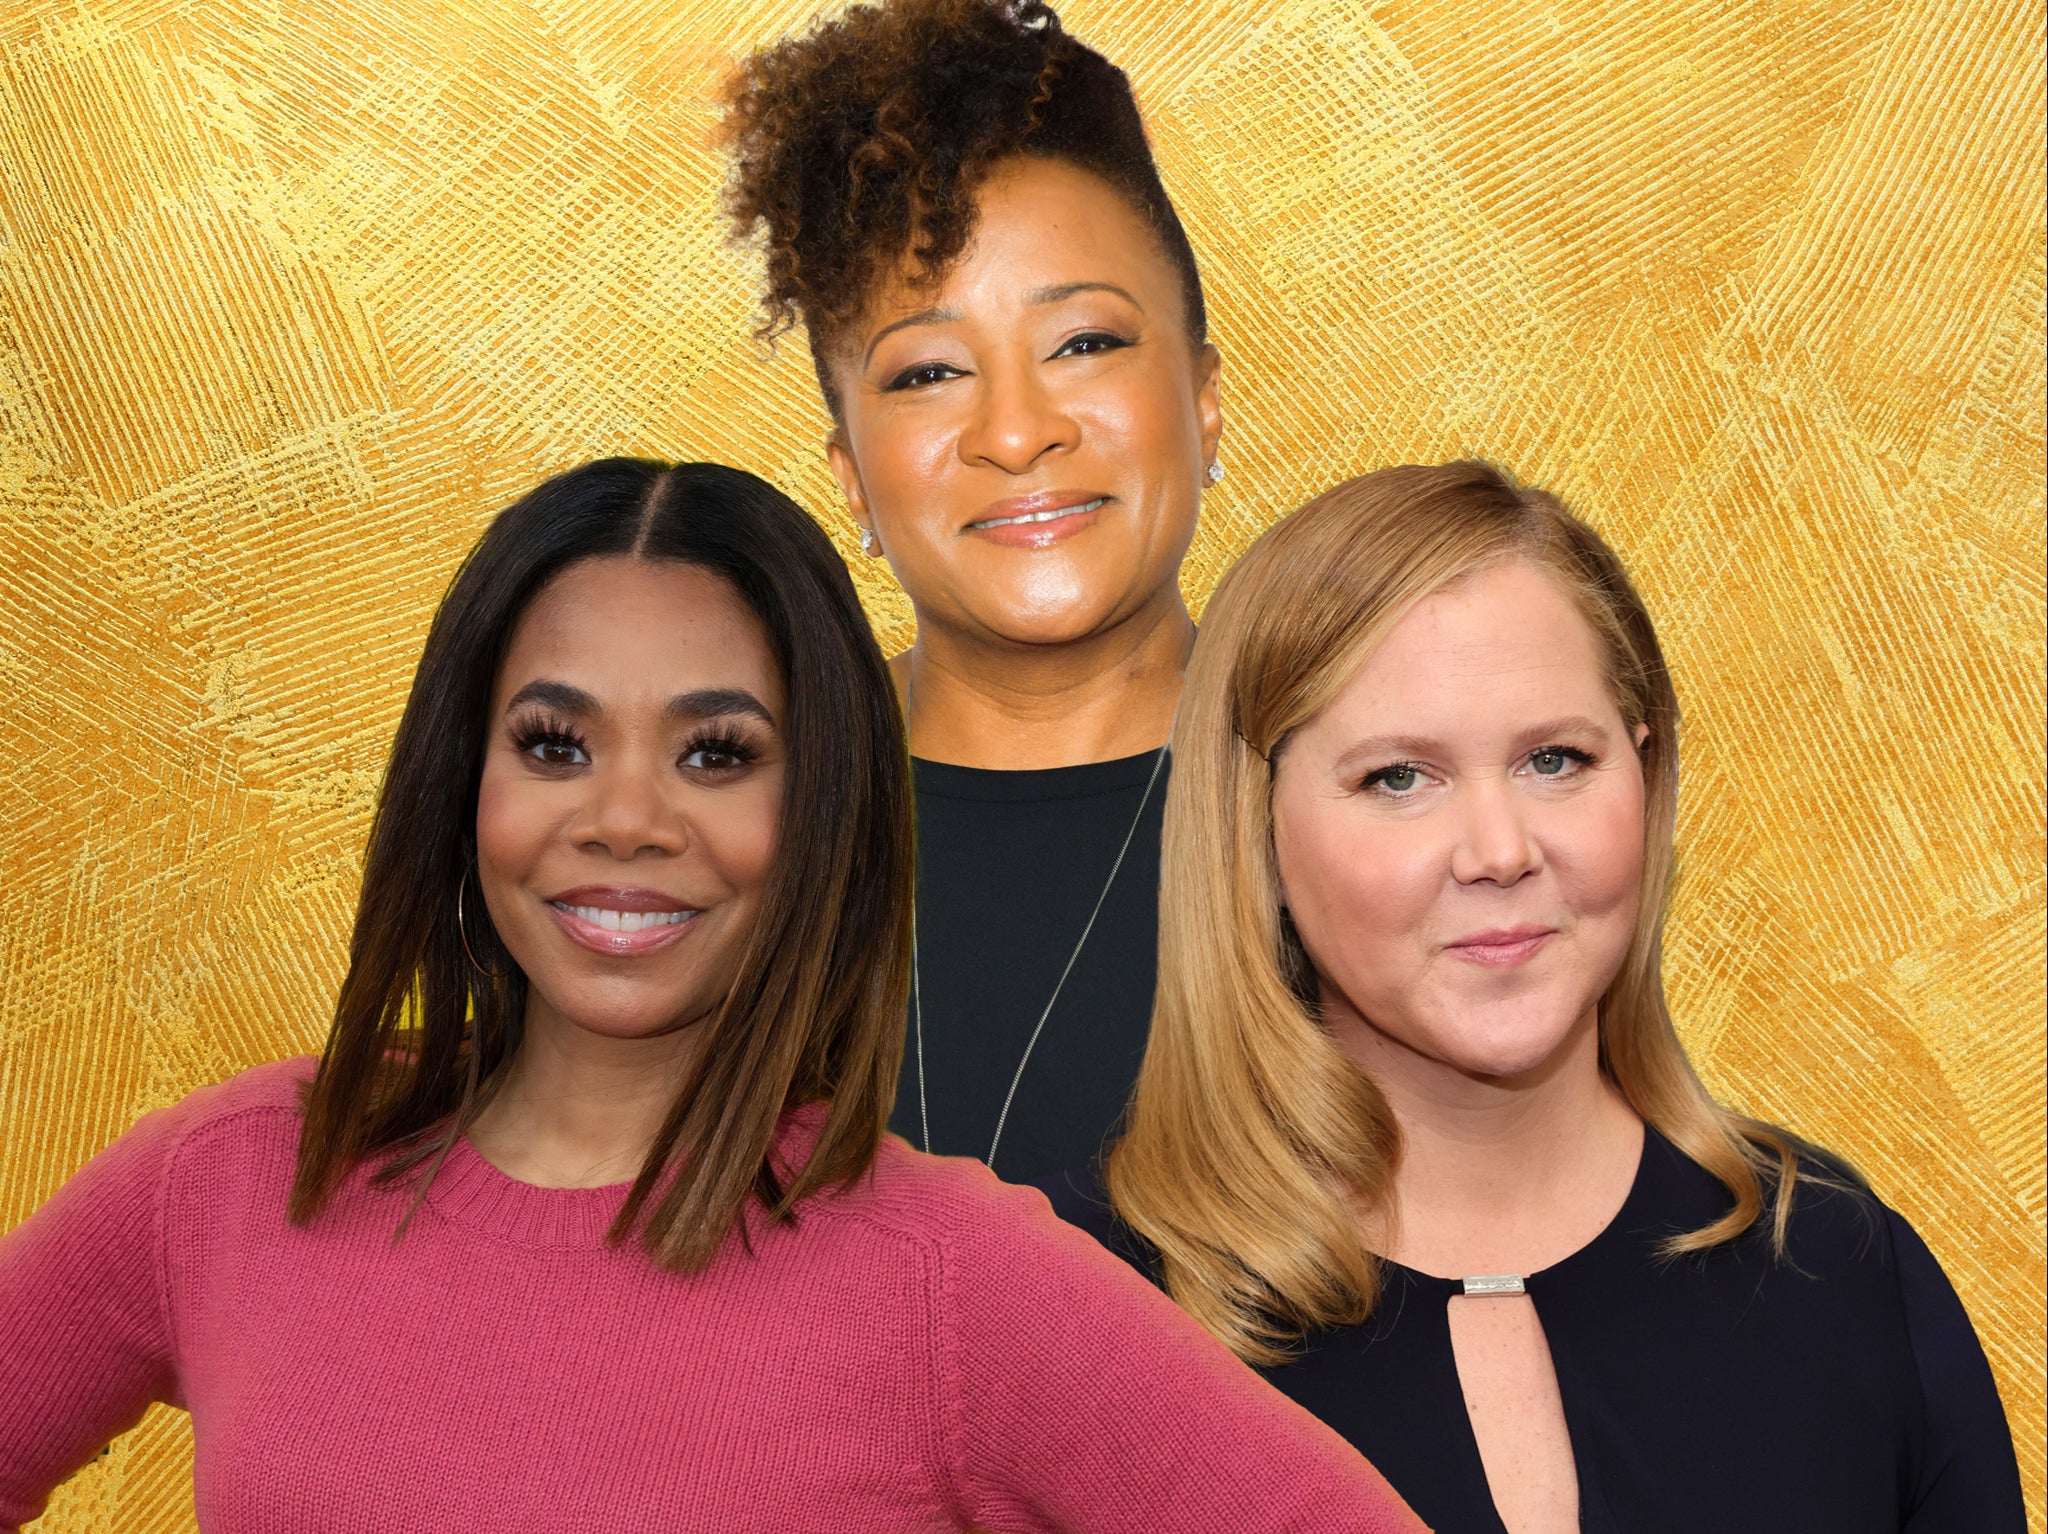 Three’s company: Regina Hall, Wanda Sykes and Amy Schumer (L-R) are hosting this year’s Oscars ceremony as a trio